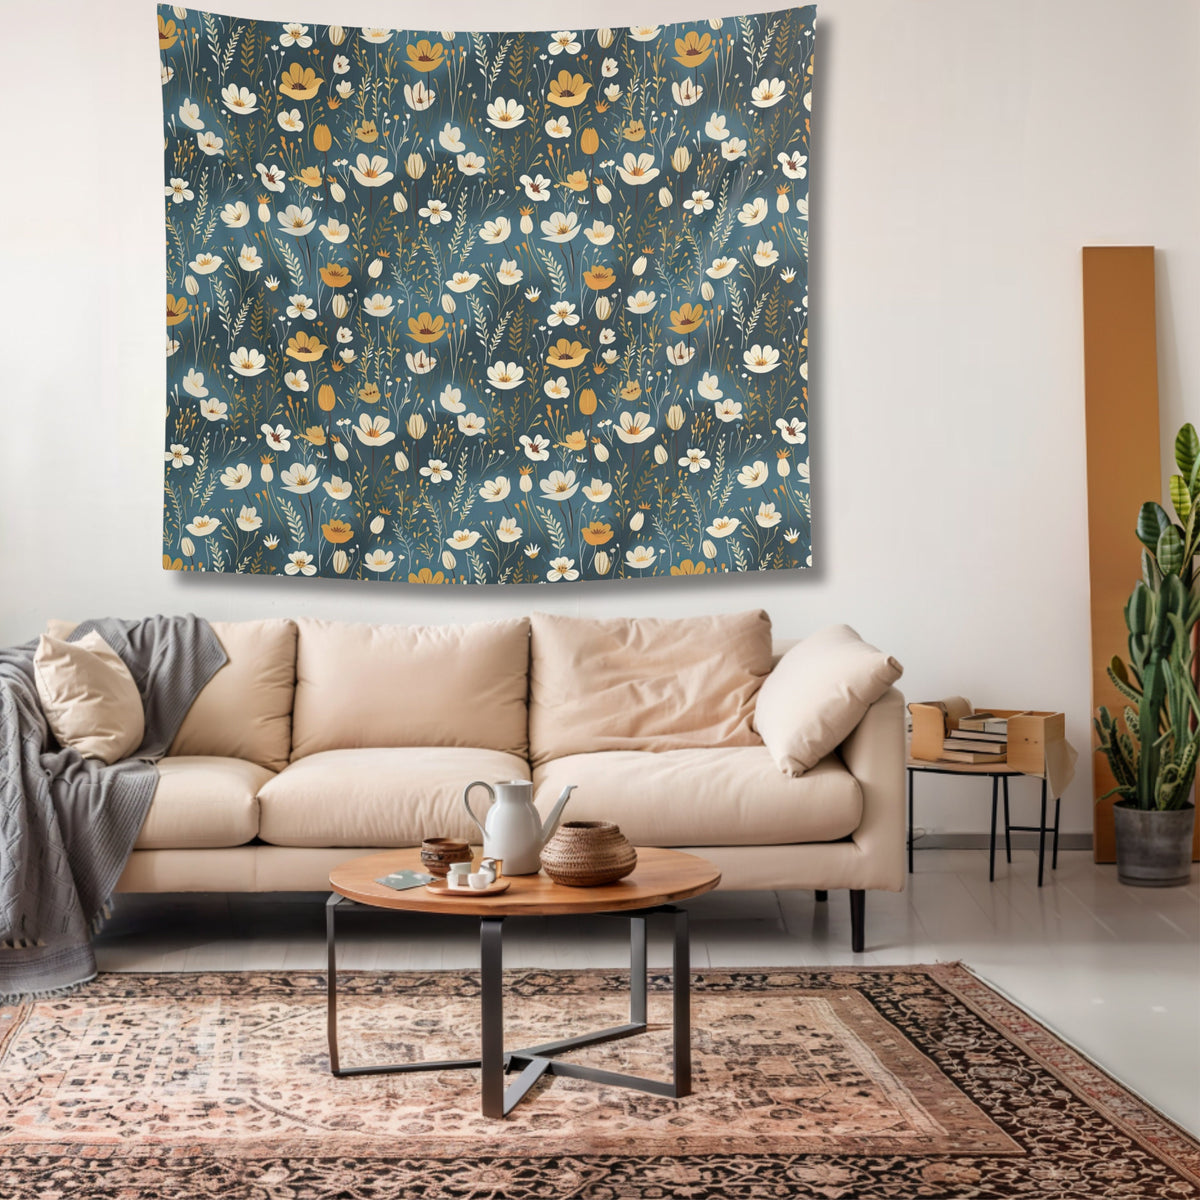 Boho Living Room Decor Boho Aesthetic Wall Hanging Tapestry Wildflower Cottagecore Decor Bedroom Garden Canvas Tapestry Large Wildflower